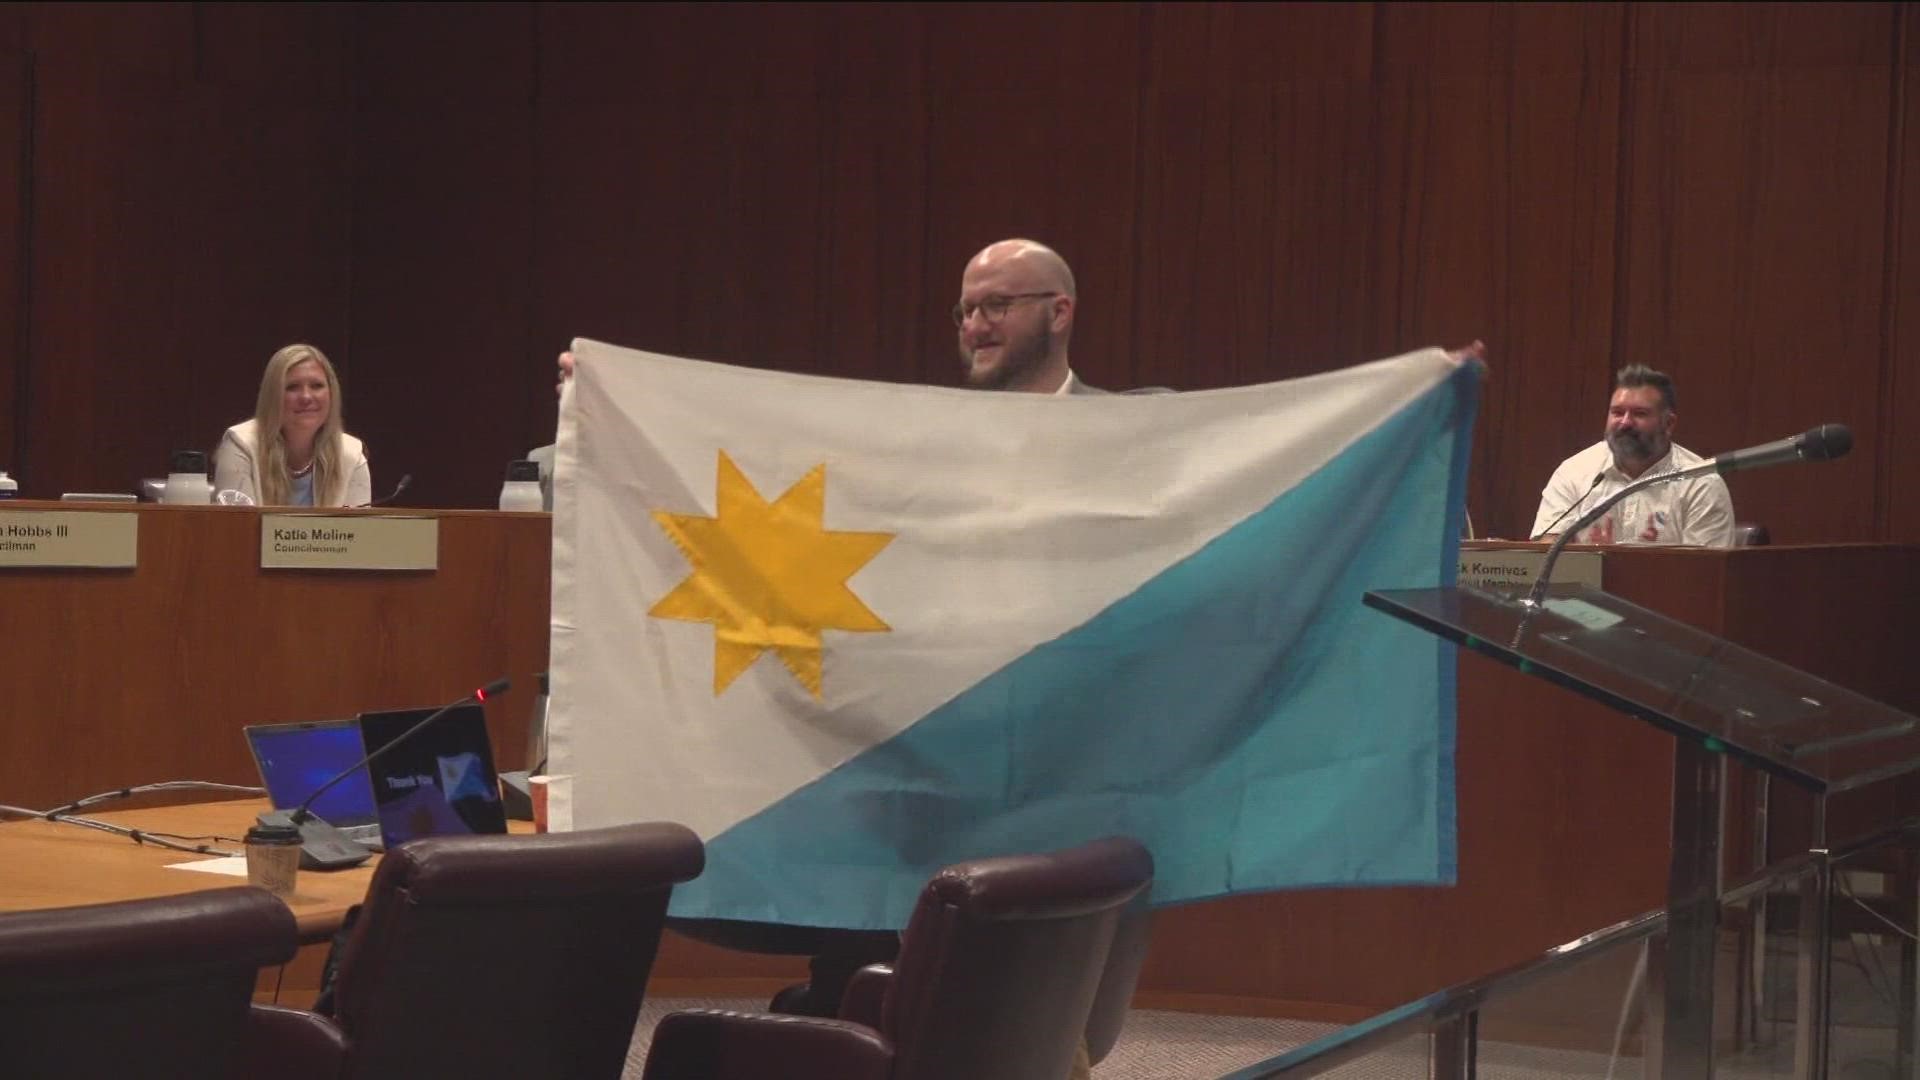 City council will decide whether or not to make this Toledo's official flag next Tuesday and if approved, the flag's official rollout would begin almost immediately.